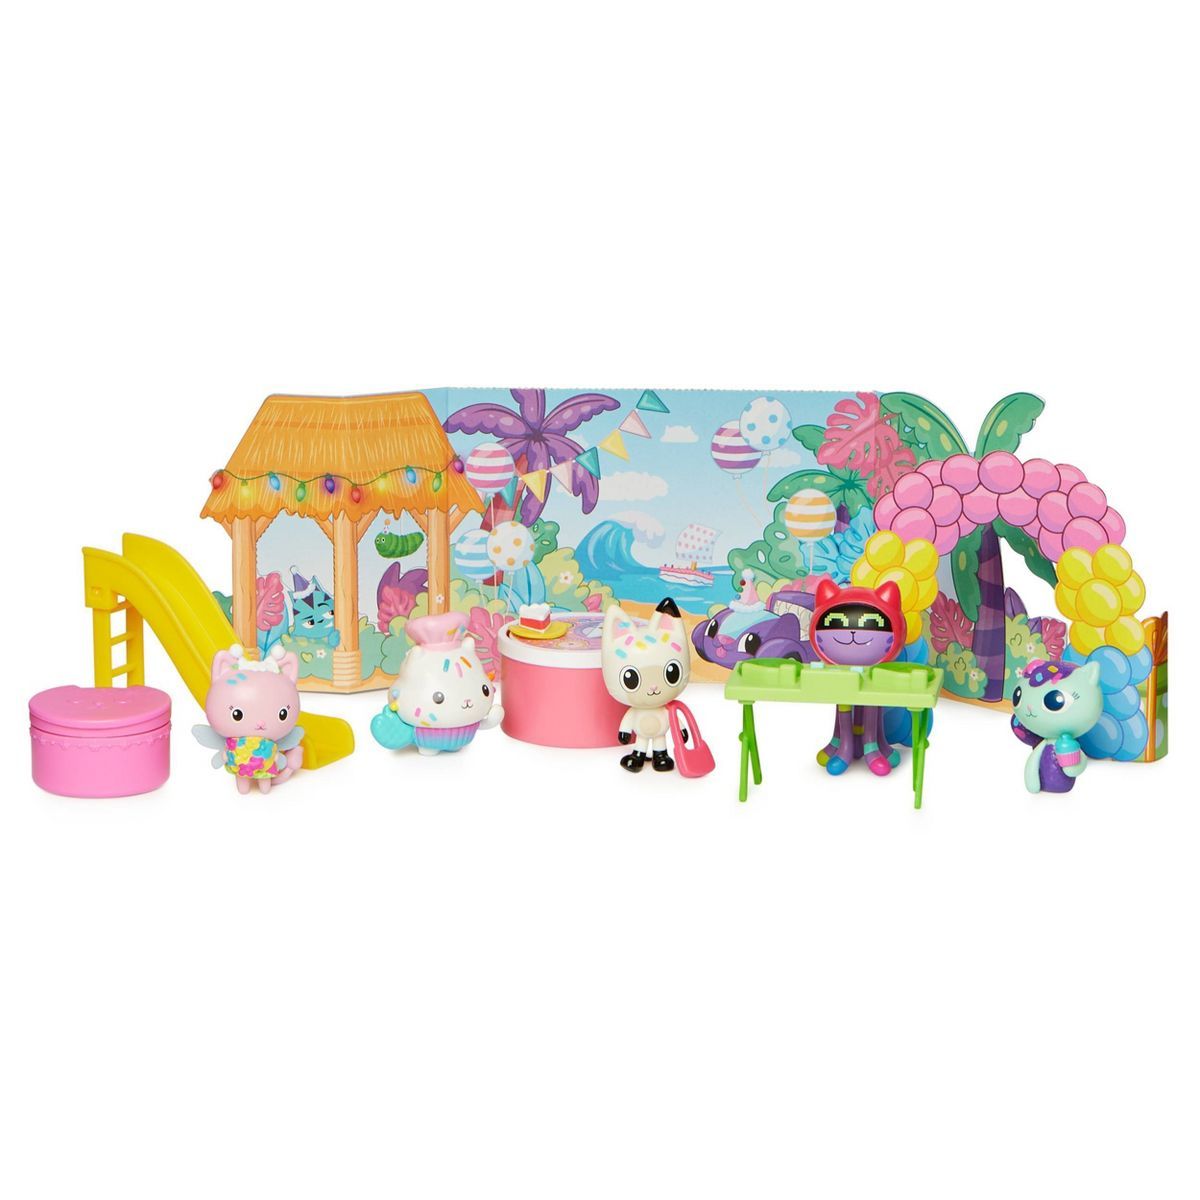 Gabby's Dollhouse – Pandy Paws' Birthday Figure Set (Target Exclusive) | Target